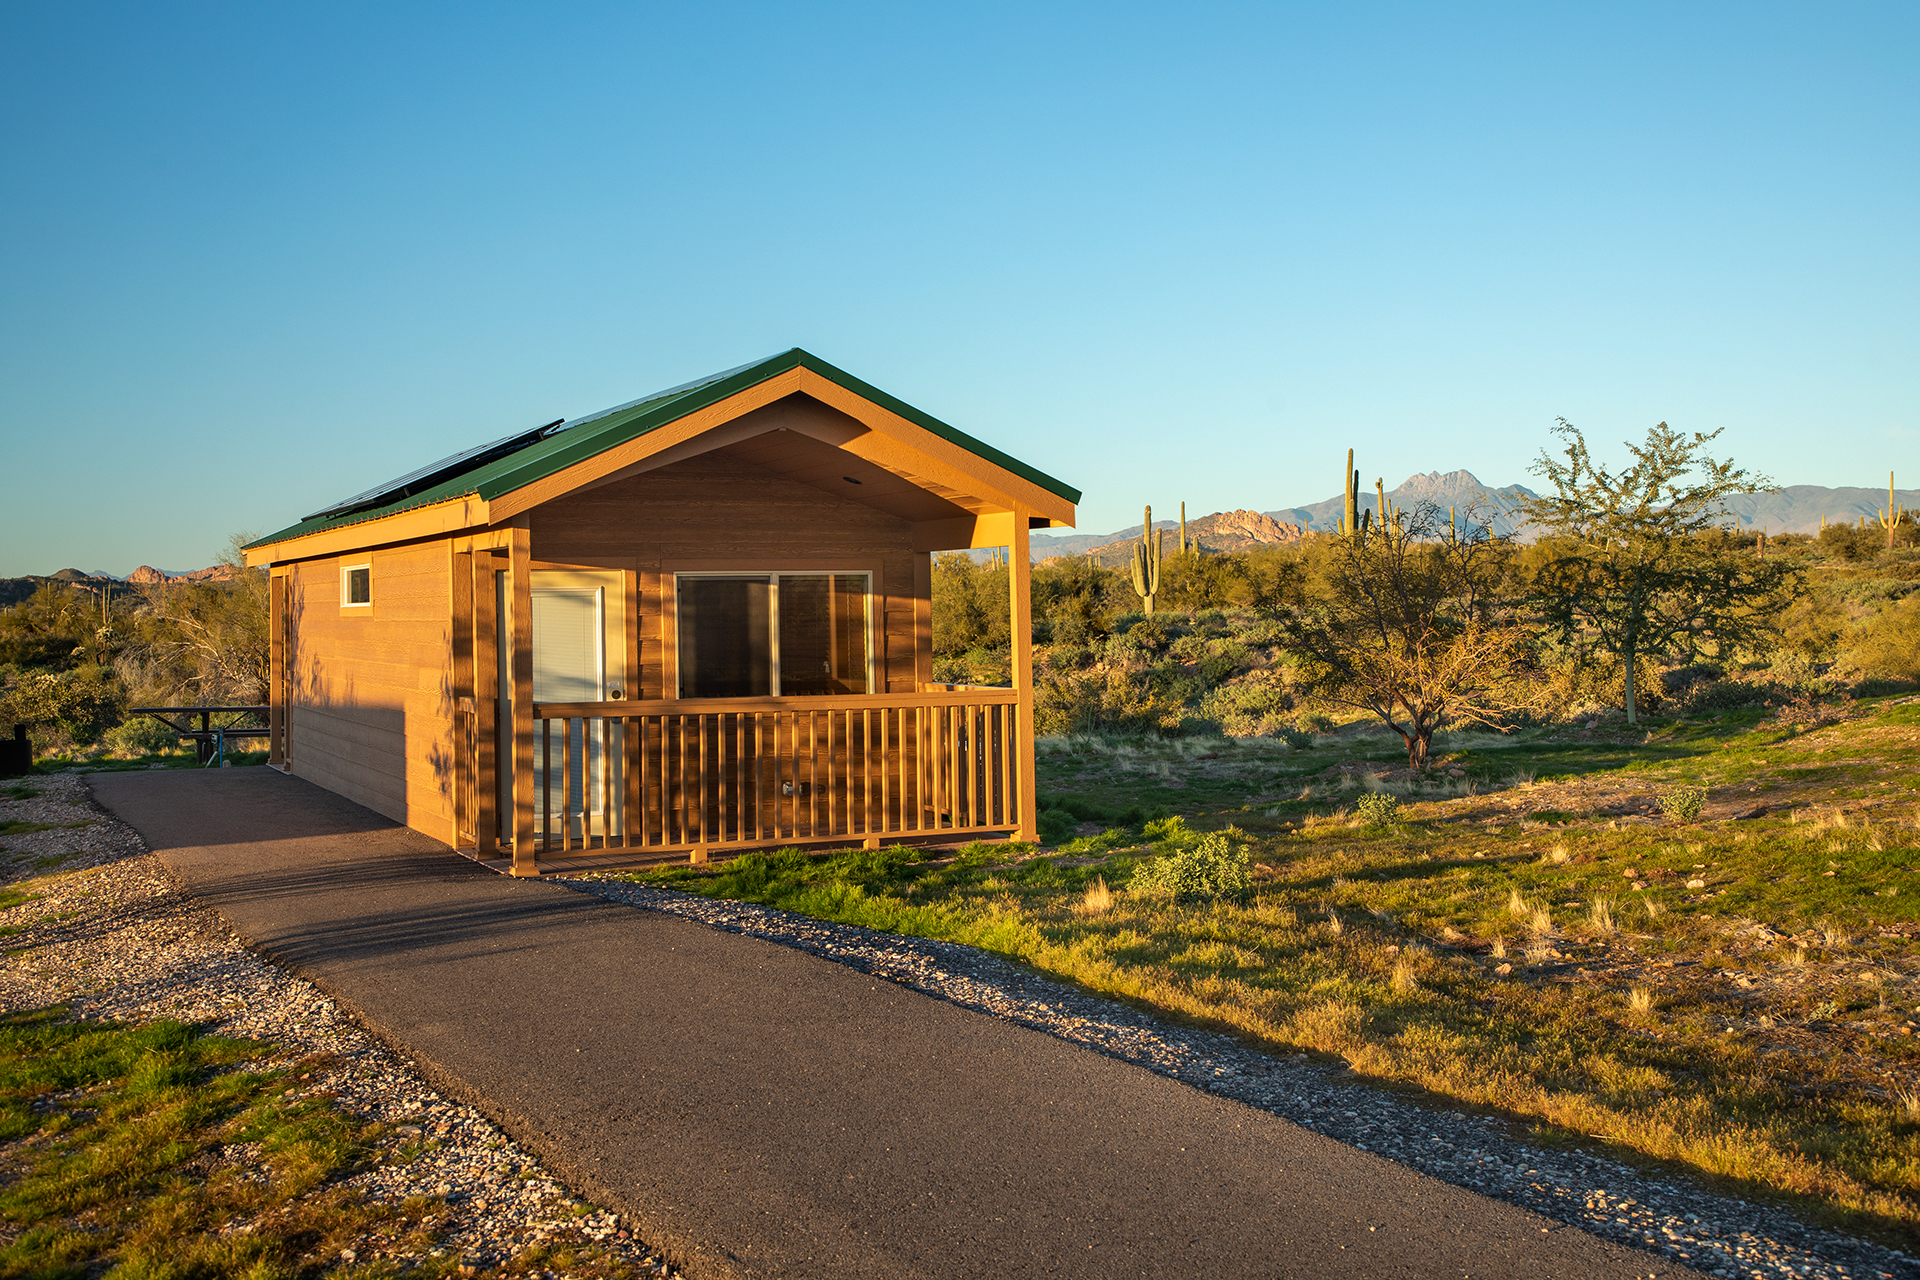 A view of the front of one of the rental cabins at Lost Dutchman State Park near Phoenix